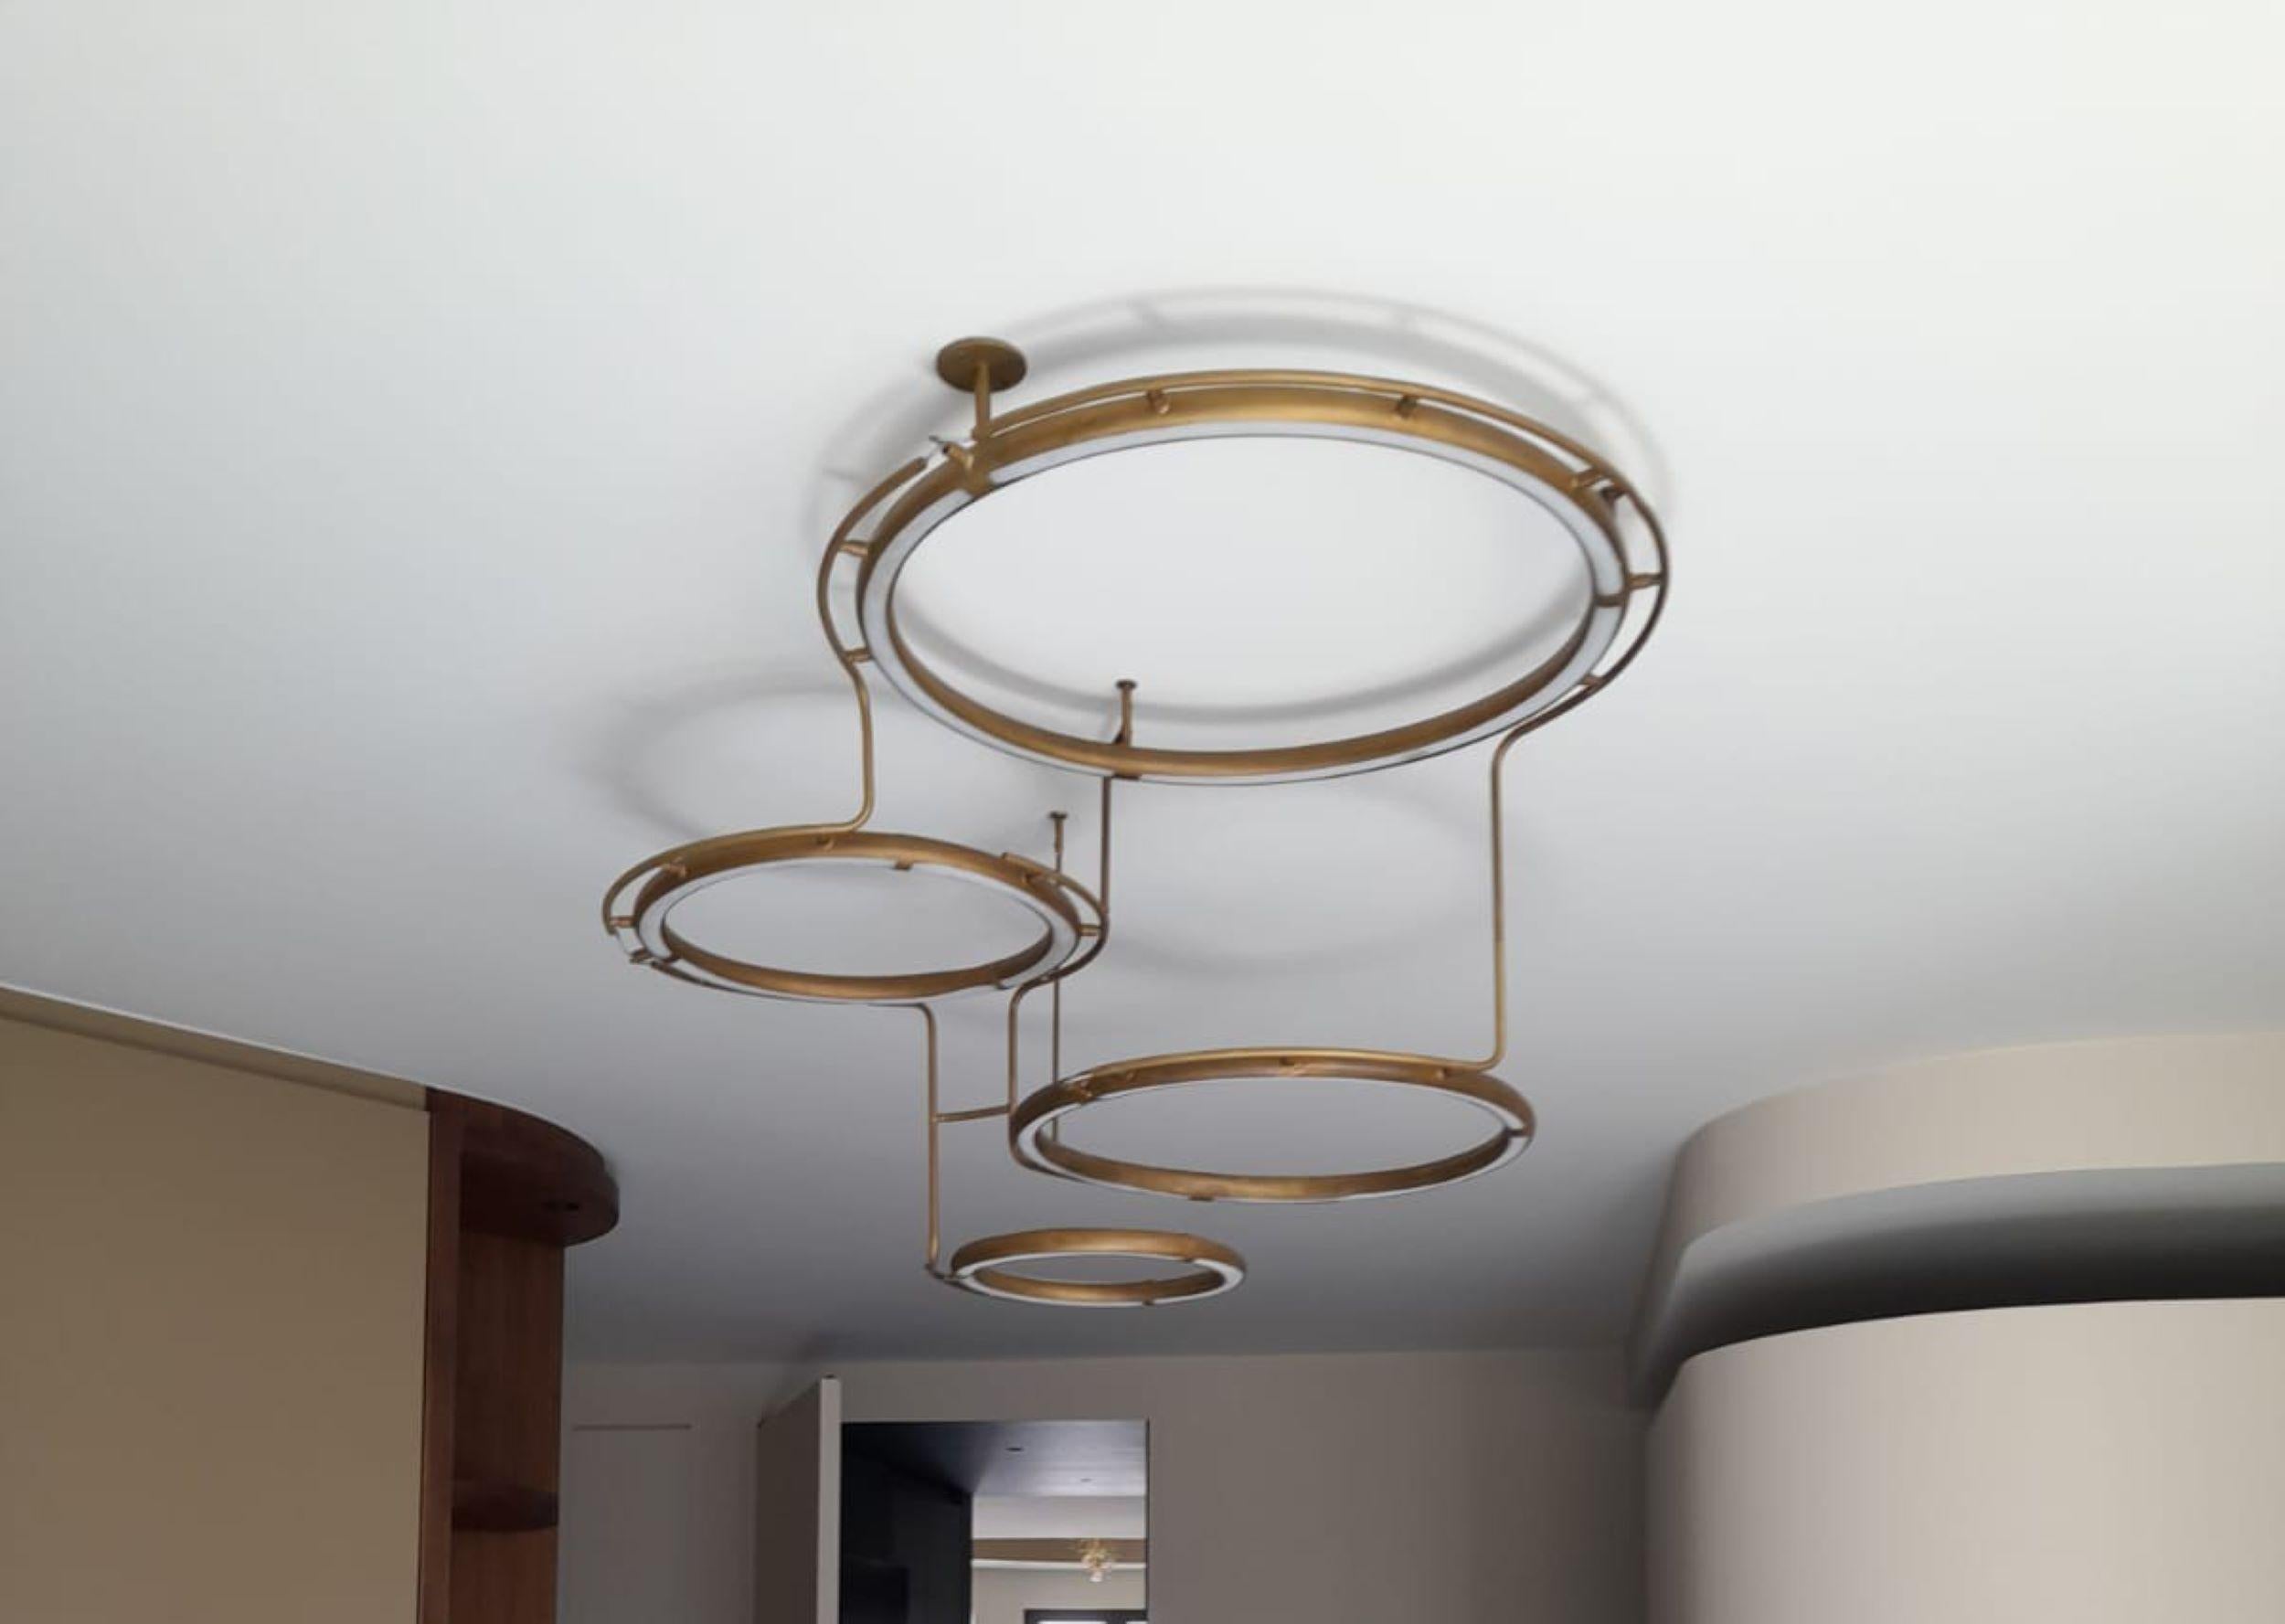 This pendant is a construction of 4 brass rings with flexible led tubes in the rings. The rings are connected to each other and hang over and next to each other. 
Measures: There is 1 ring of 51 cm, 1 ring of 41,5 cm, 1 ring of 35,5 cm and 1 ring of